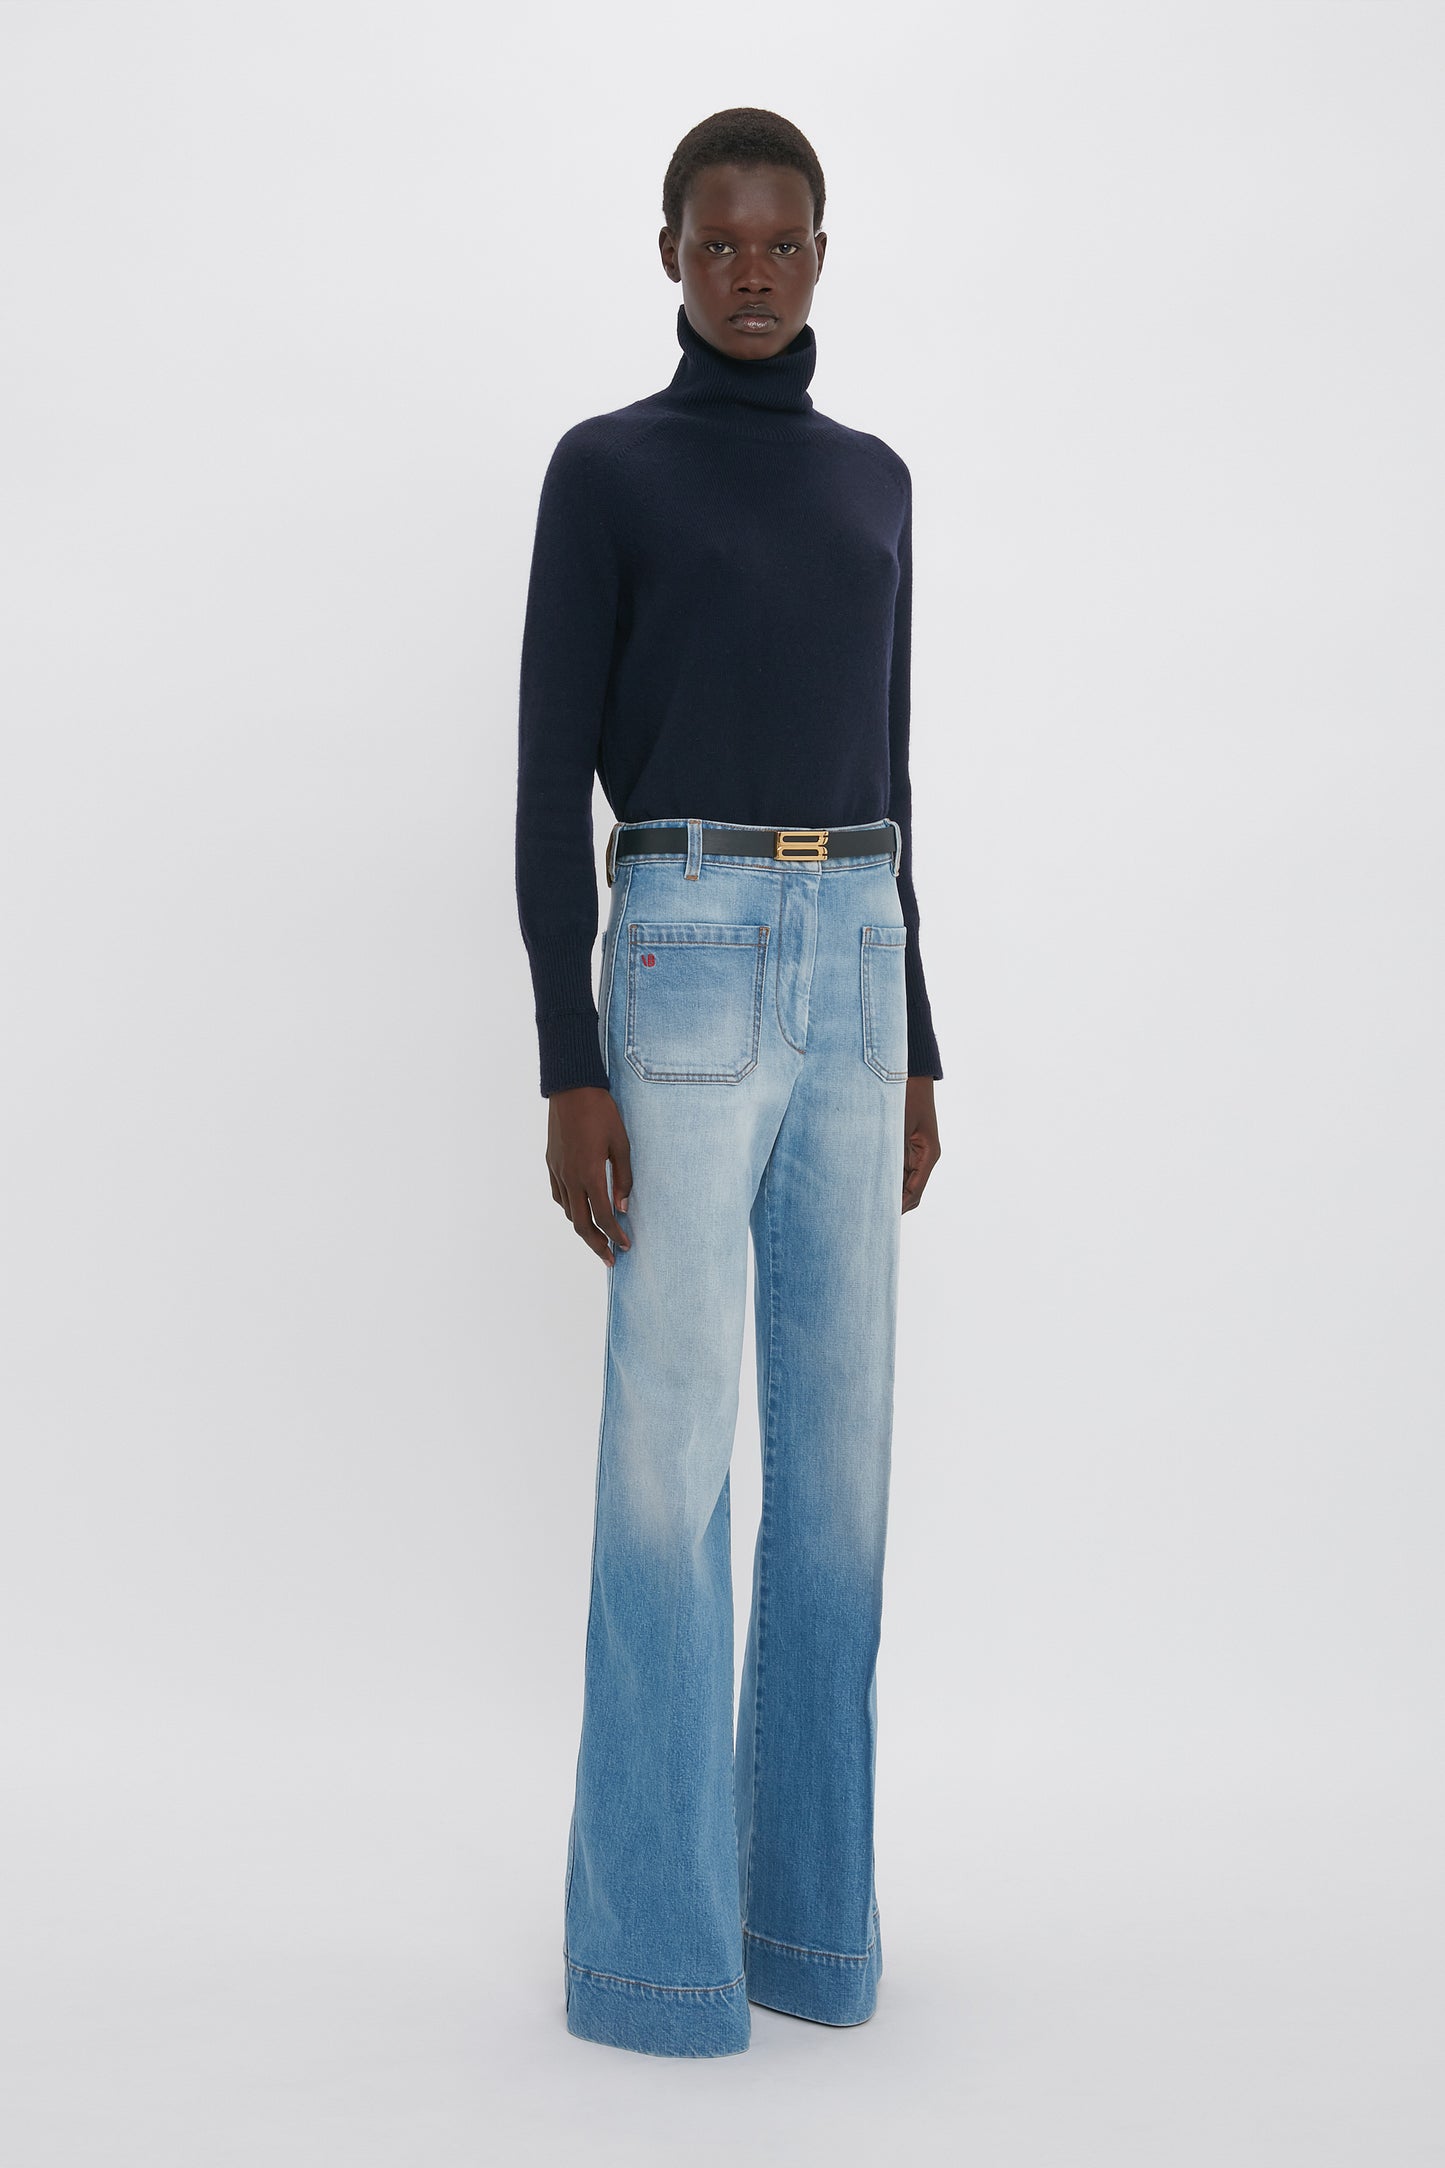 A person stands against a plain background wearing a dark turtleneck sweater and Victoria Beckham's Alina High Waisted Jean In Light Summer Wash with front pockets, showcasing a timeless vintage denim look.